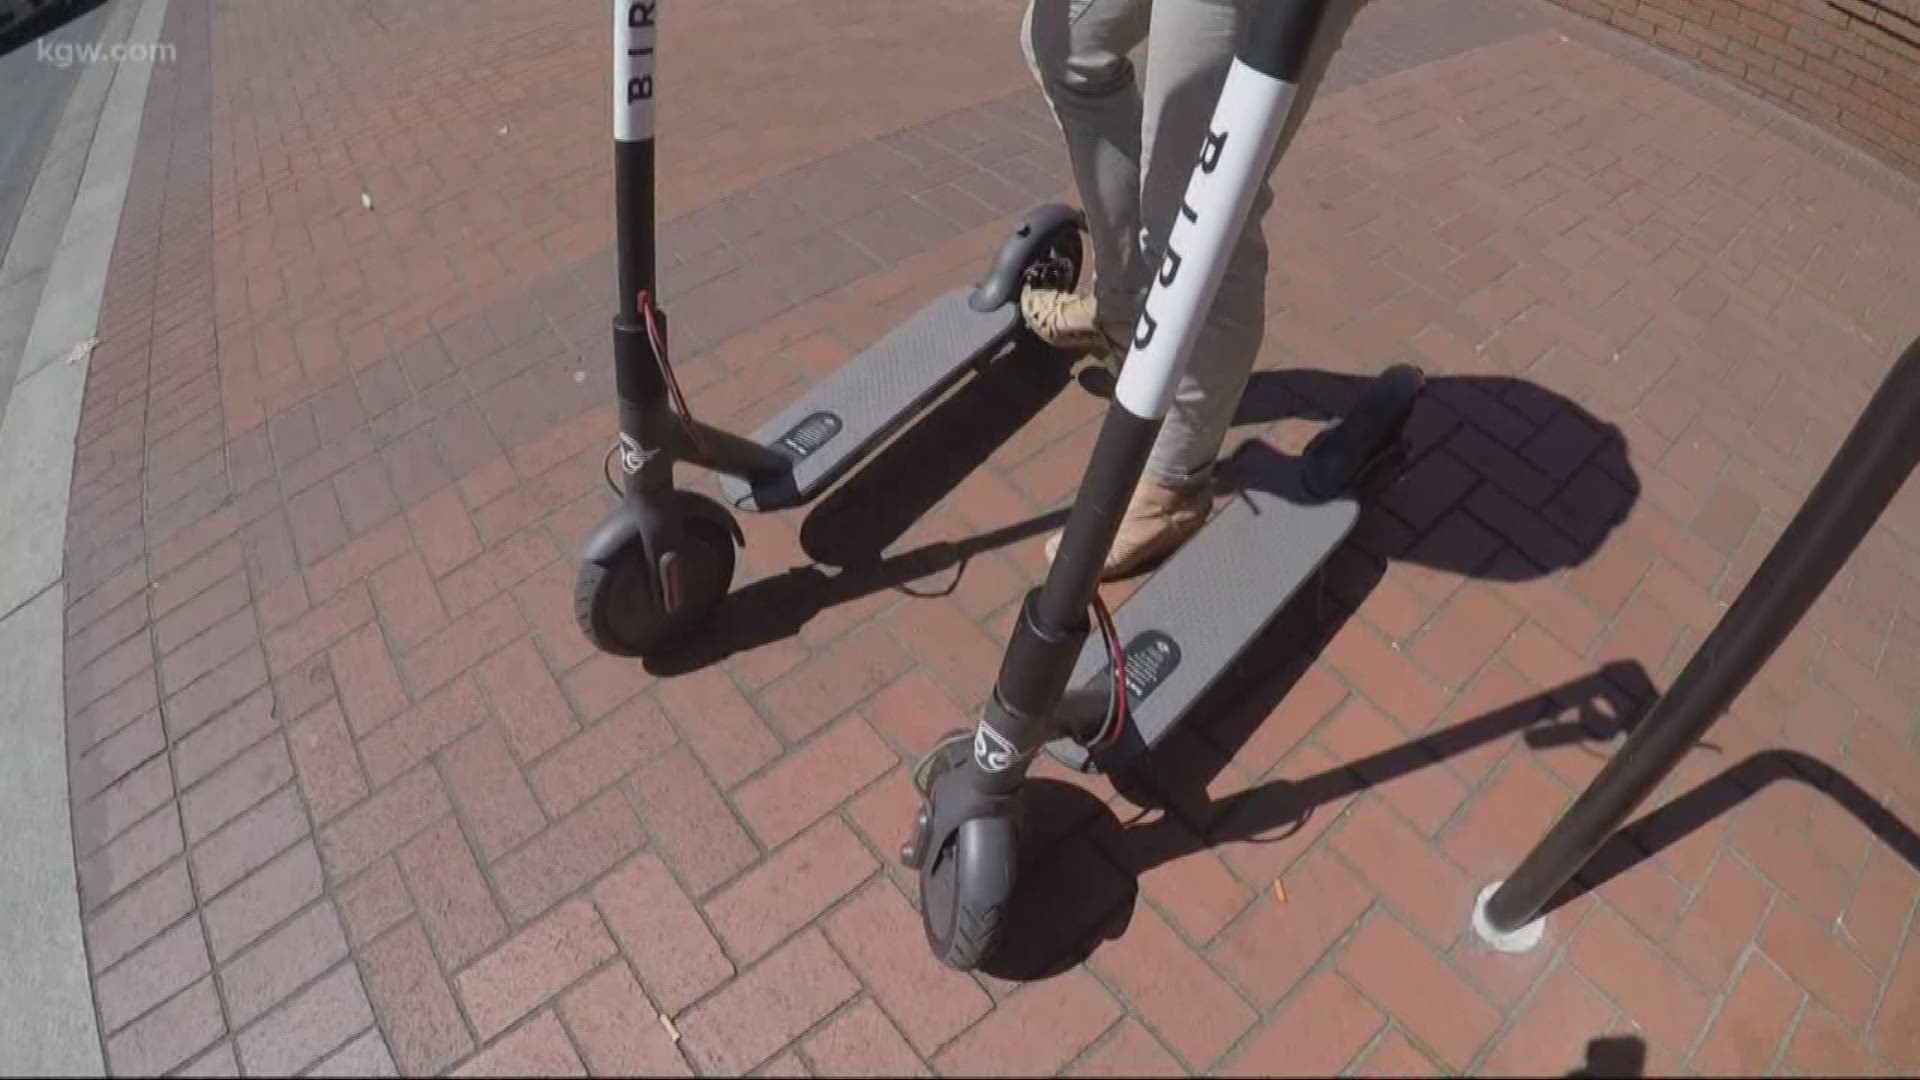 You can now rent and ride e-scooters in Portland.